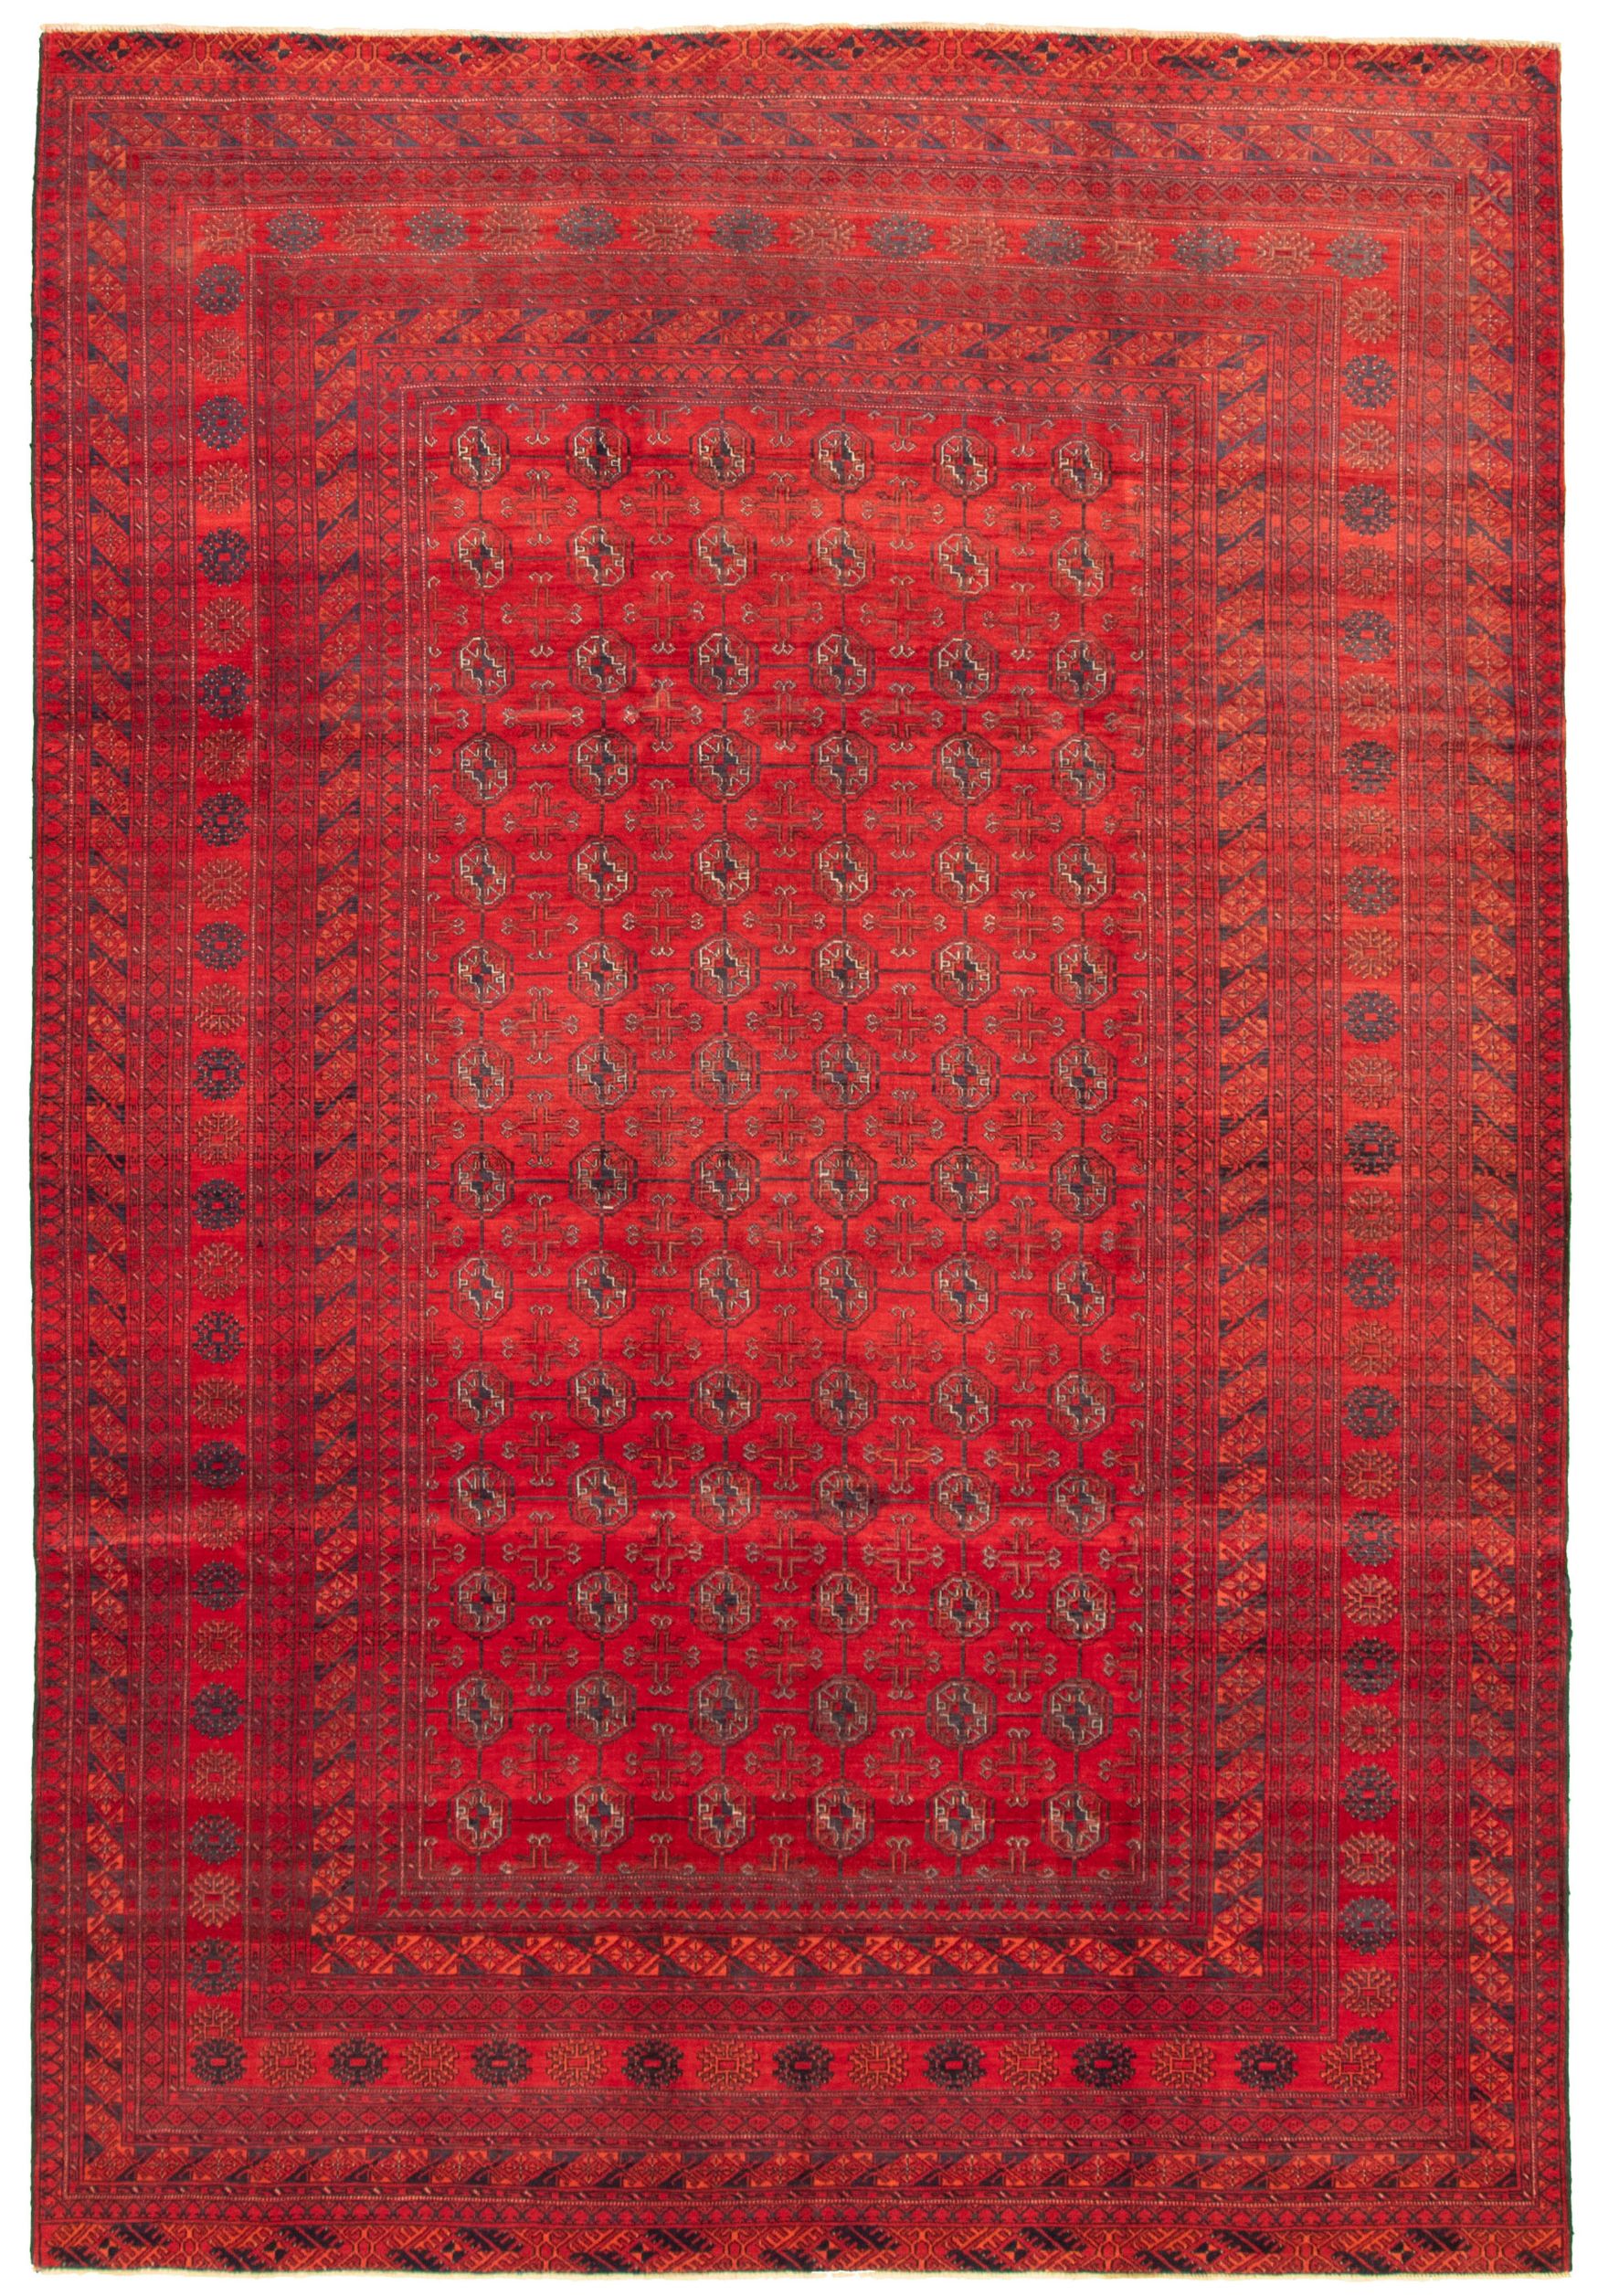 Hand-knotted Khal Mohammadi Red Wool Rug 6'7" x 9'10" Size: 6'7" x 9'10"  